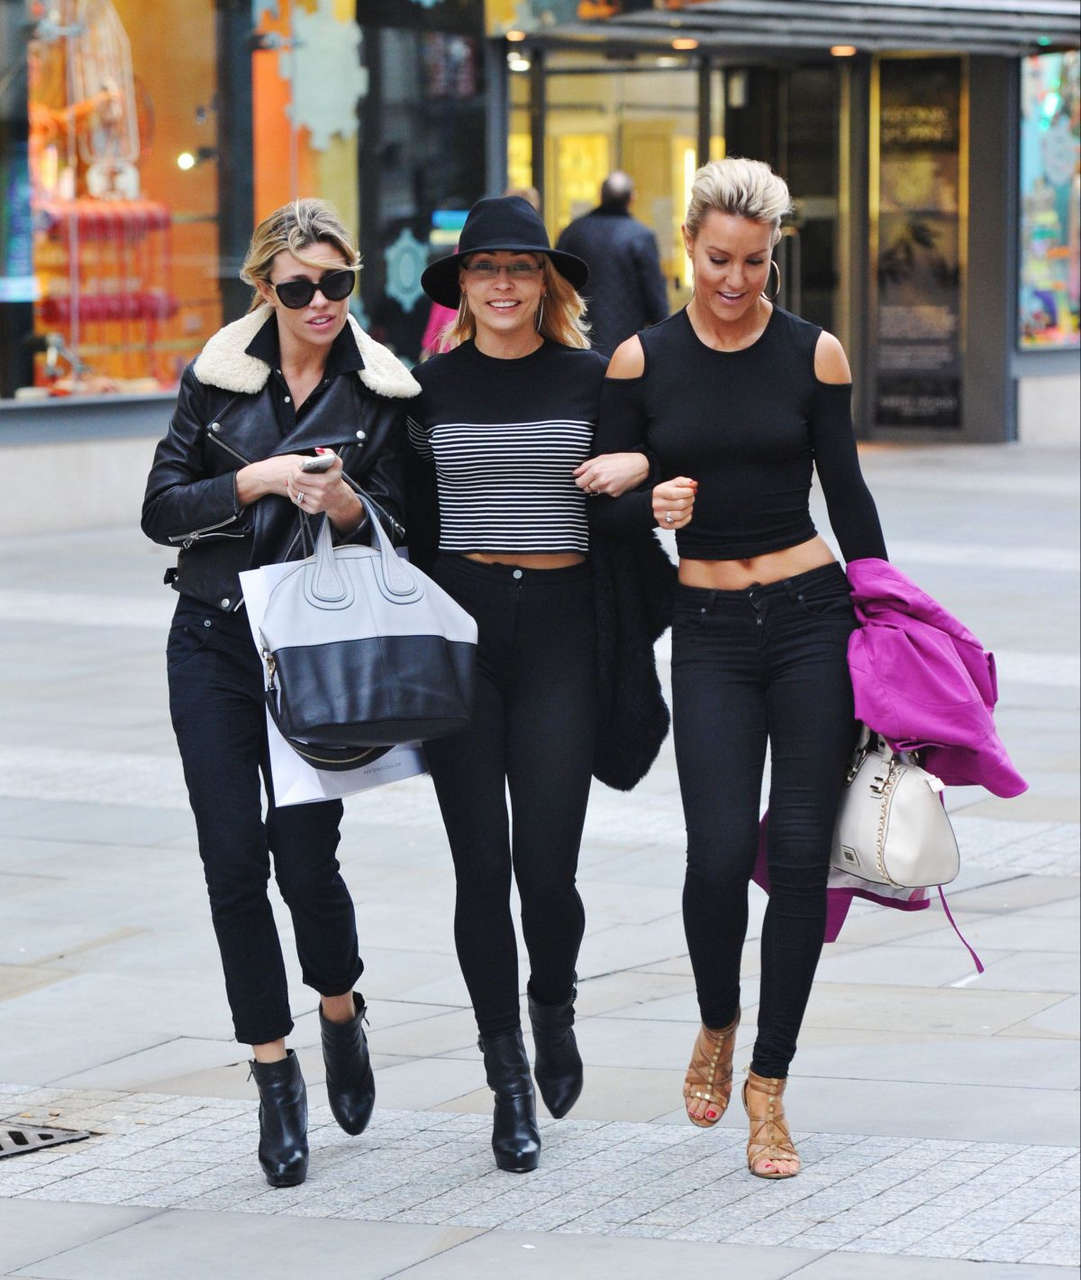 Abigail Abbey Clany Out Shopping Manchester